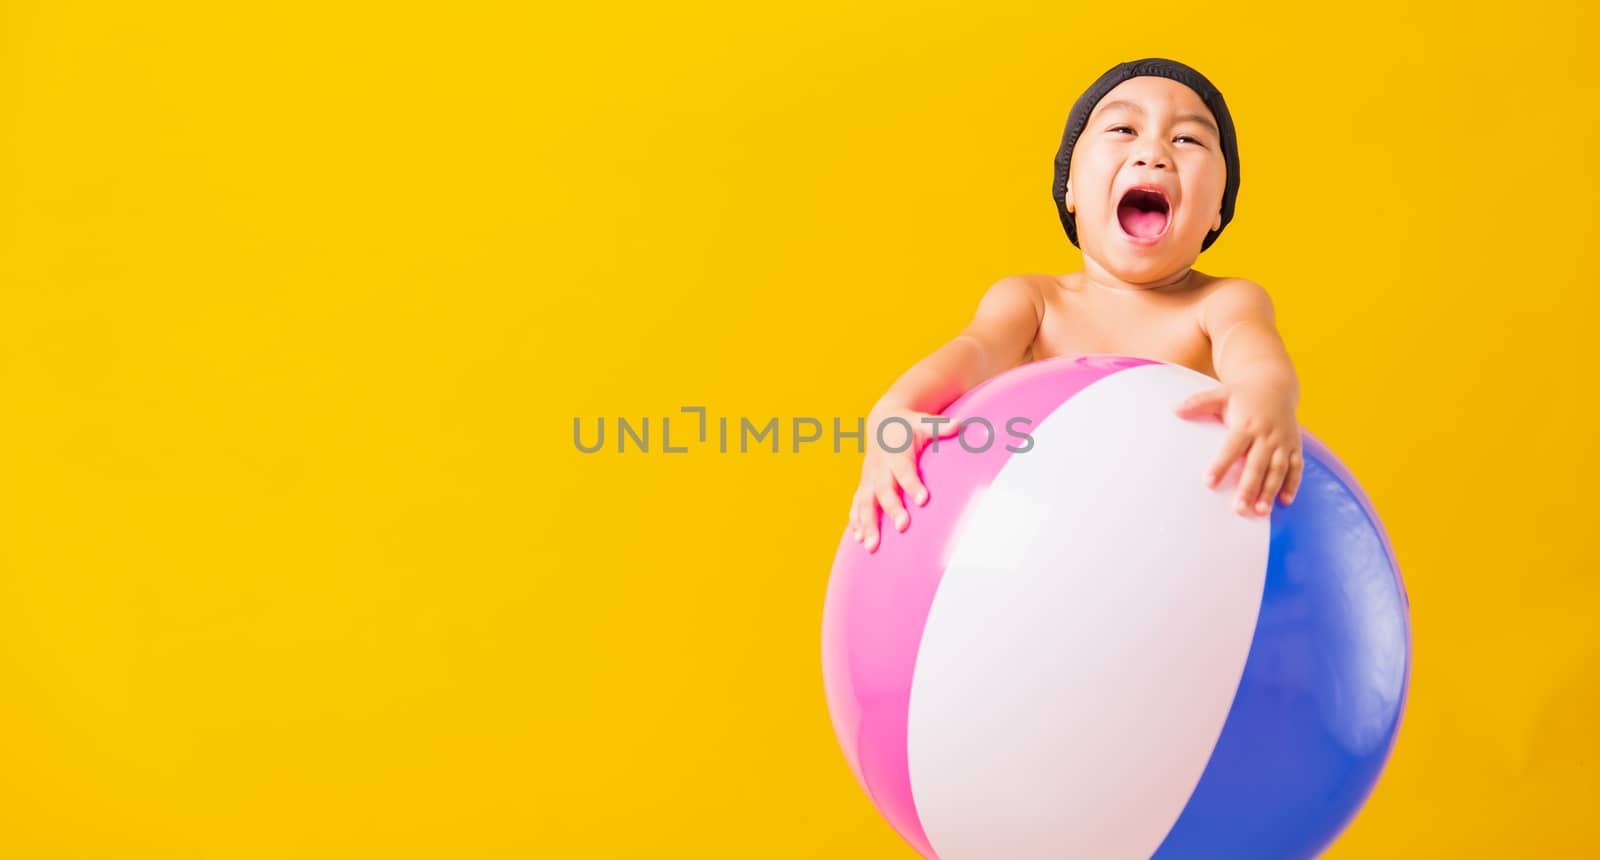 Child boy smiling in swimsuit hold beach ball by Sorapop